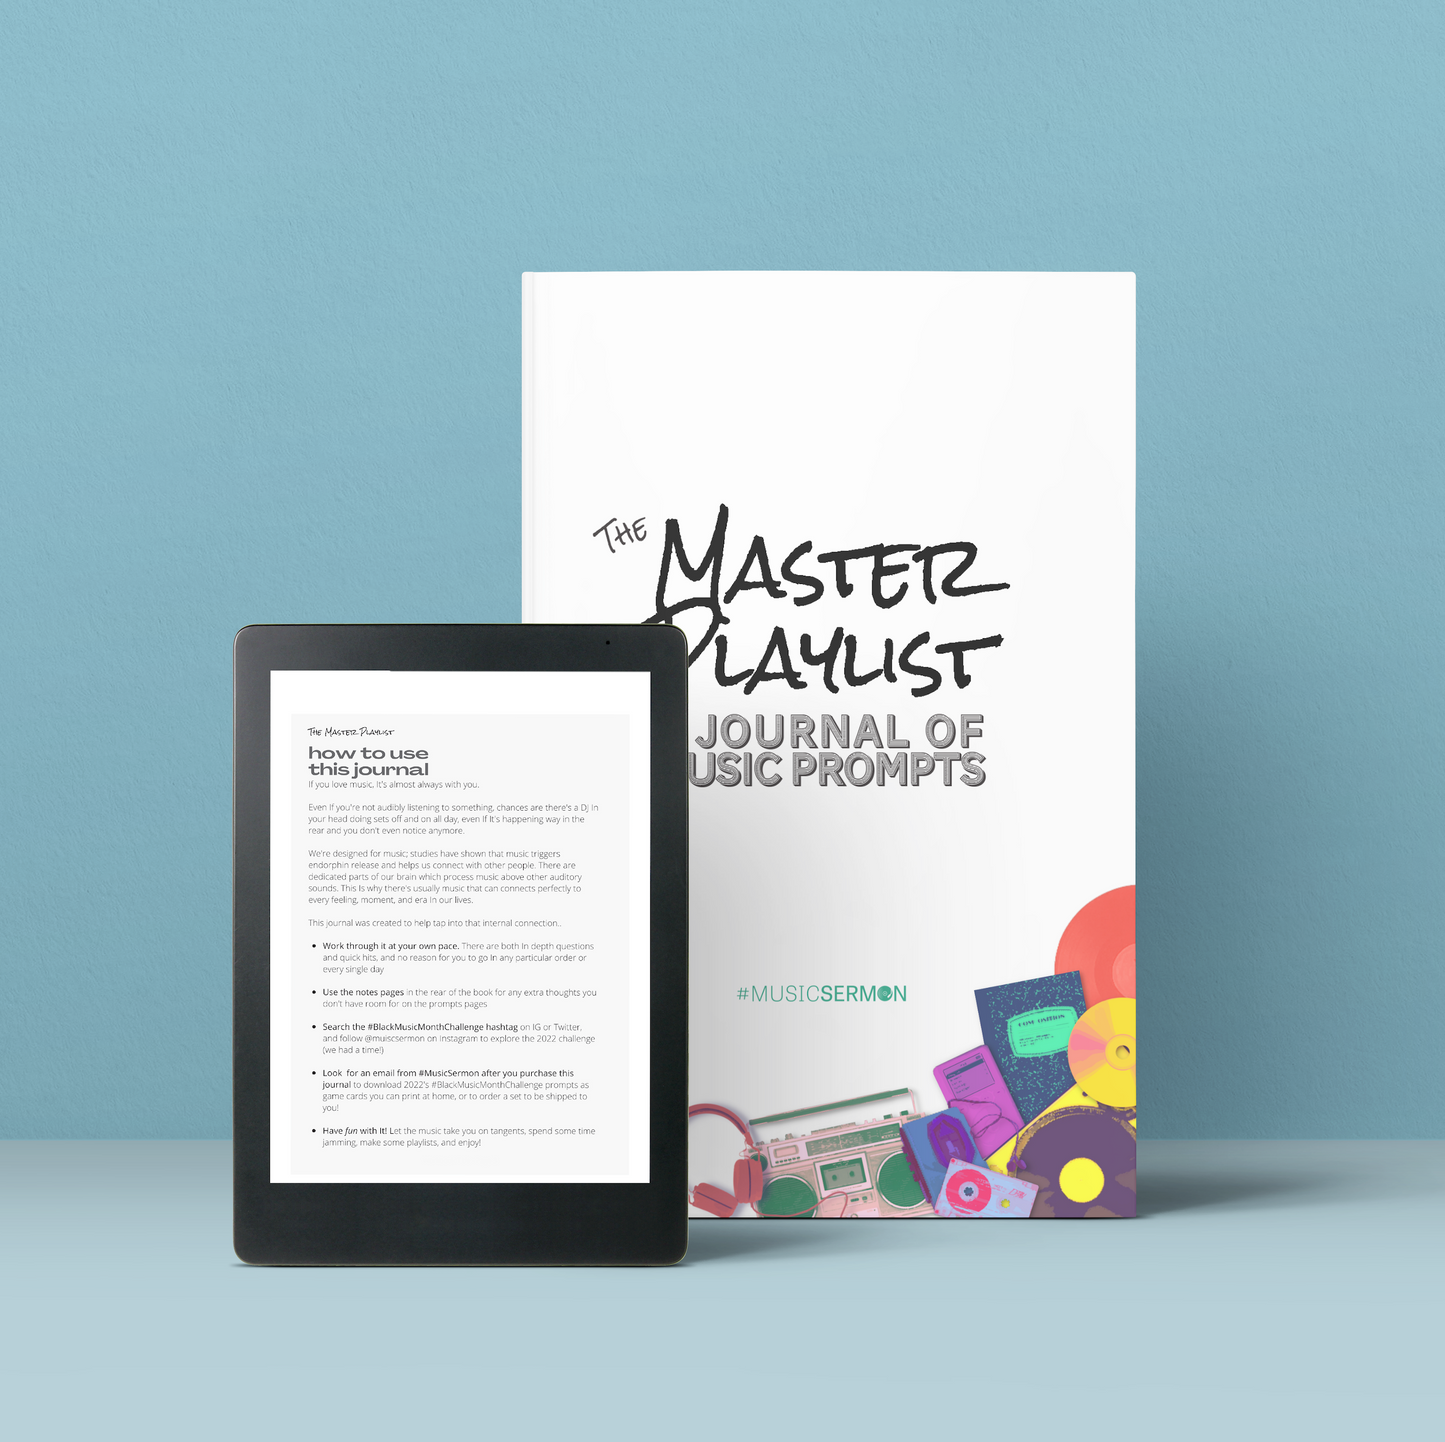 The Master Playlist: A Journal of Music Prompts